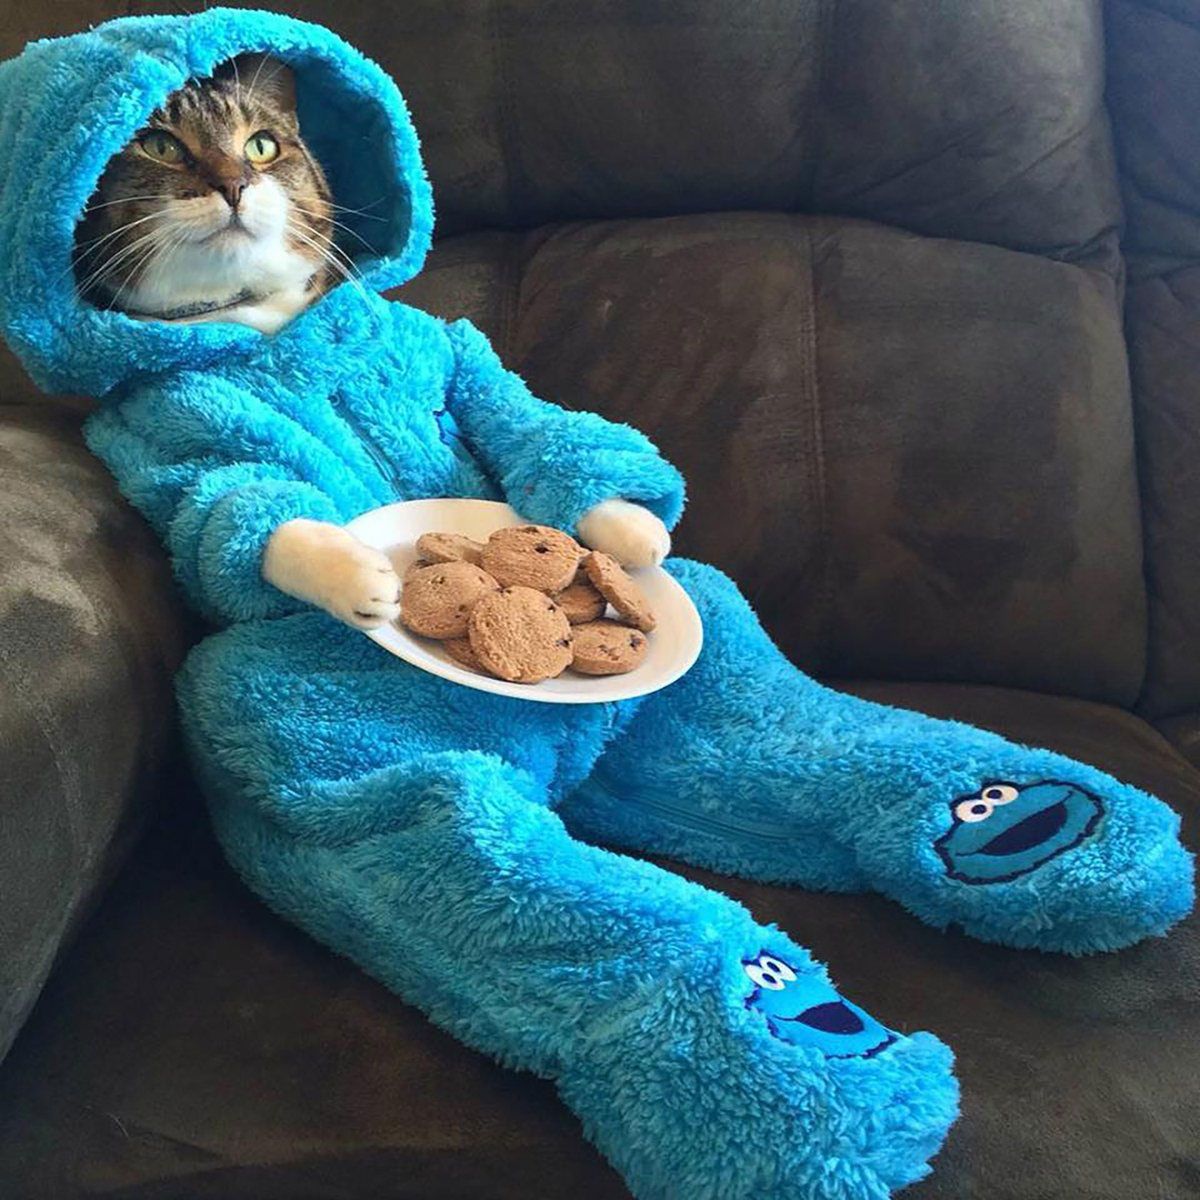 State Department Accidentally Sends Out Cat Pajama Photo